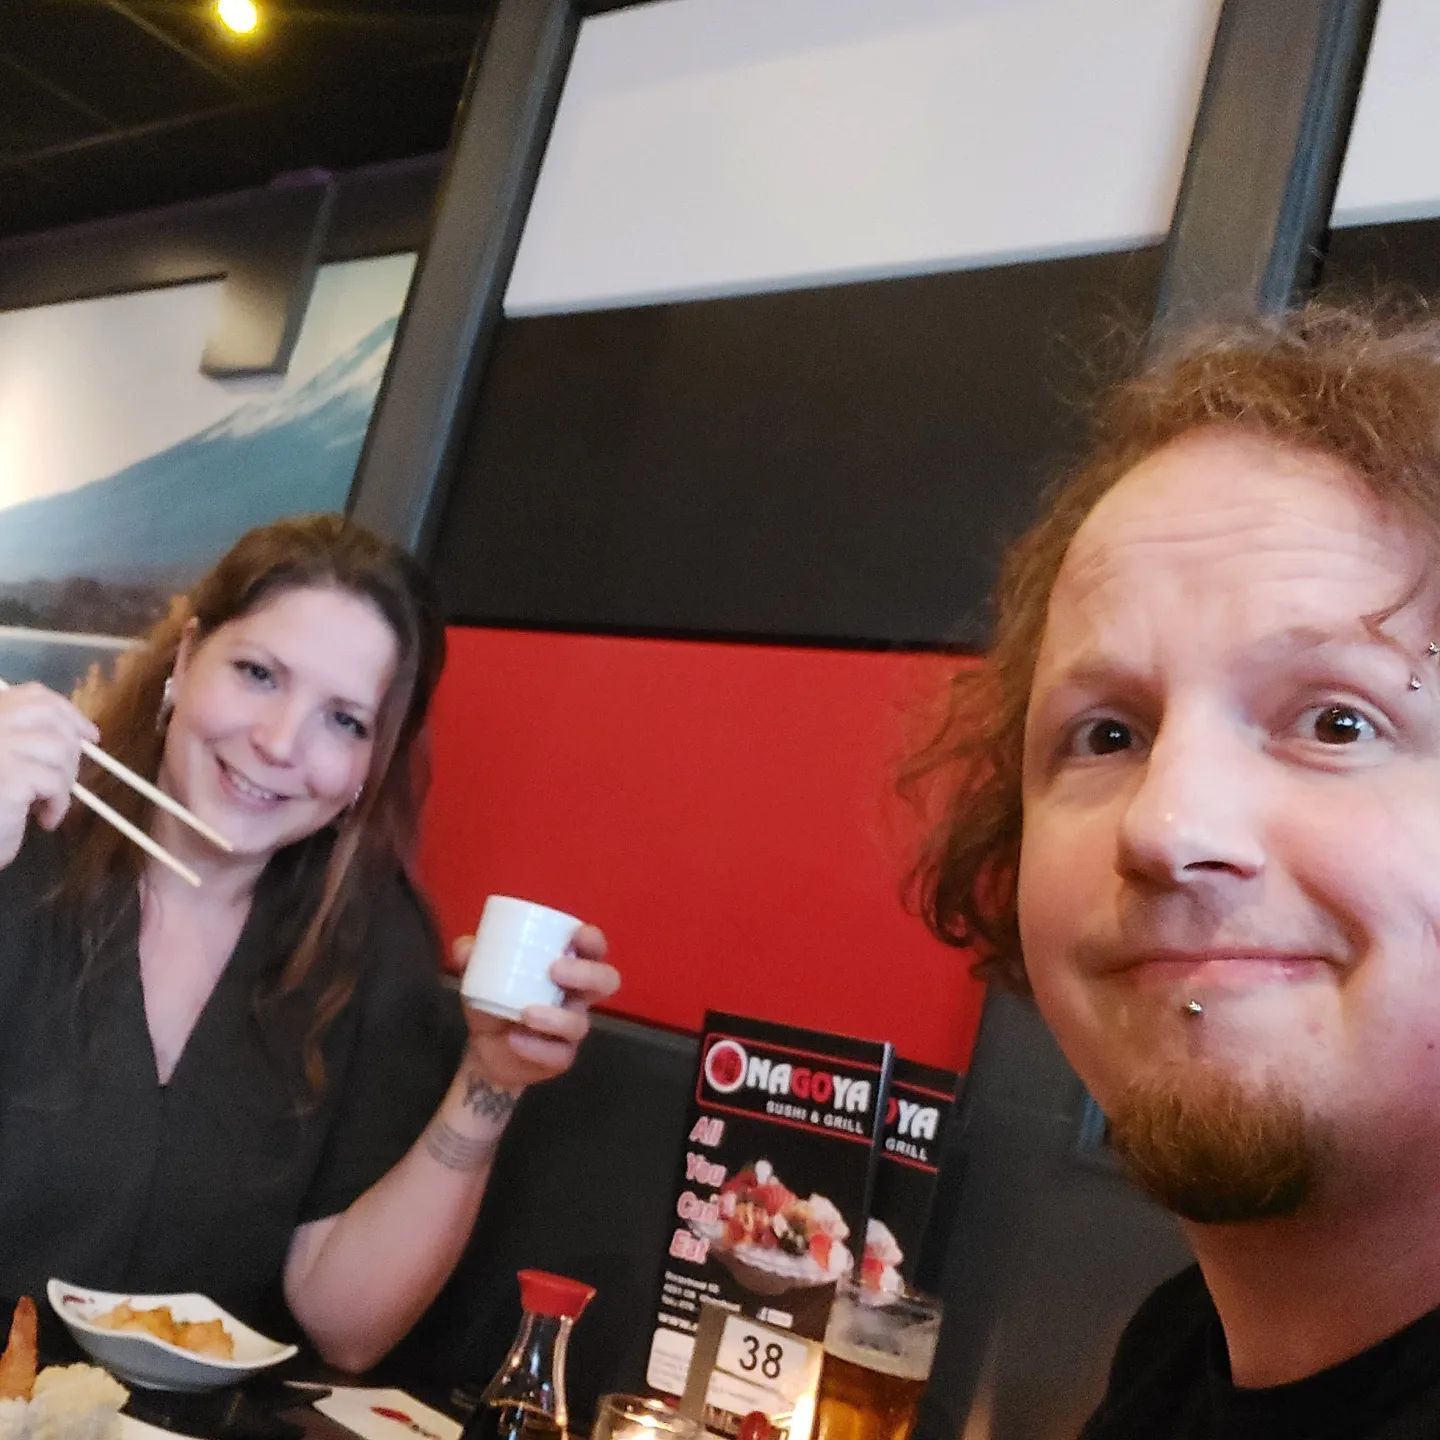 💍Been married for 1 year with the lovely @birgitbetty. ❤️ Let's celebrate with some sushi @nagoya_ulvenhout Itadakimasu!

#retrogamepapa #married #sushi #sushitime #love